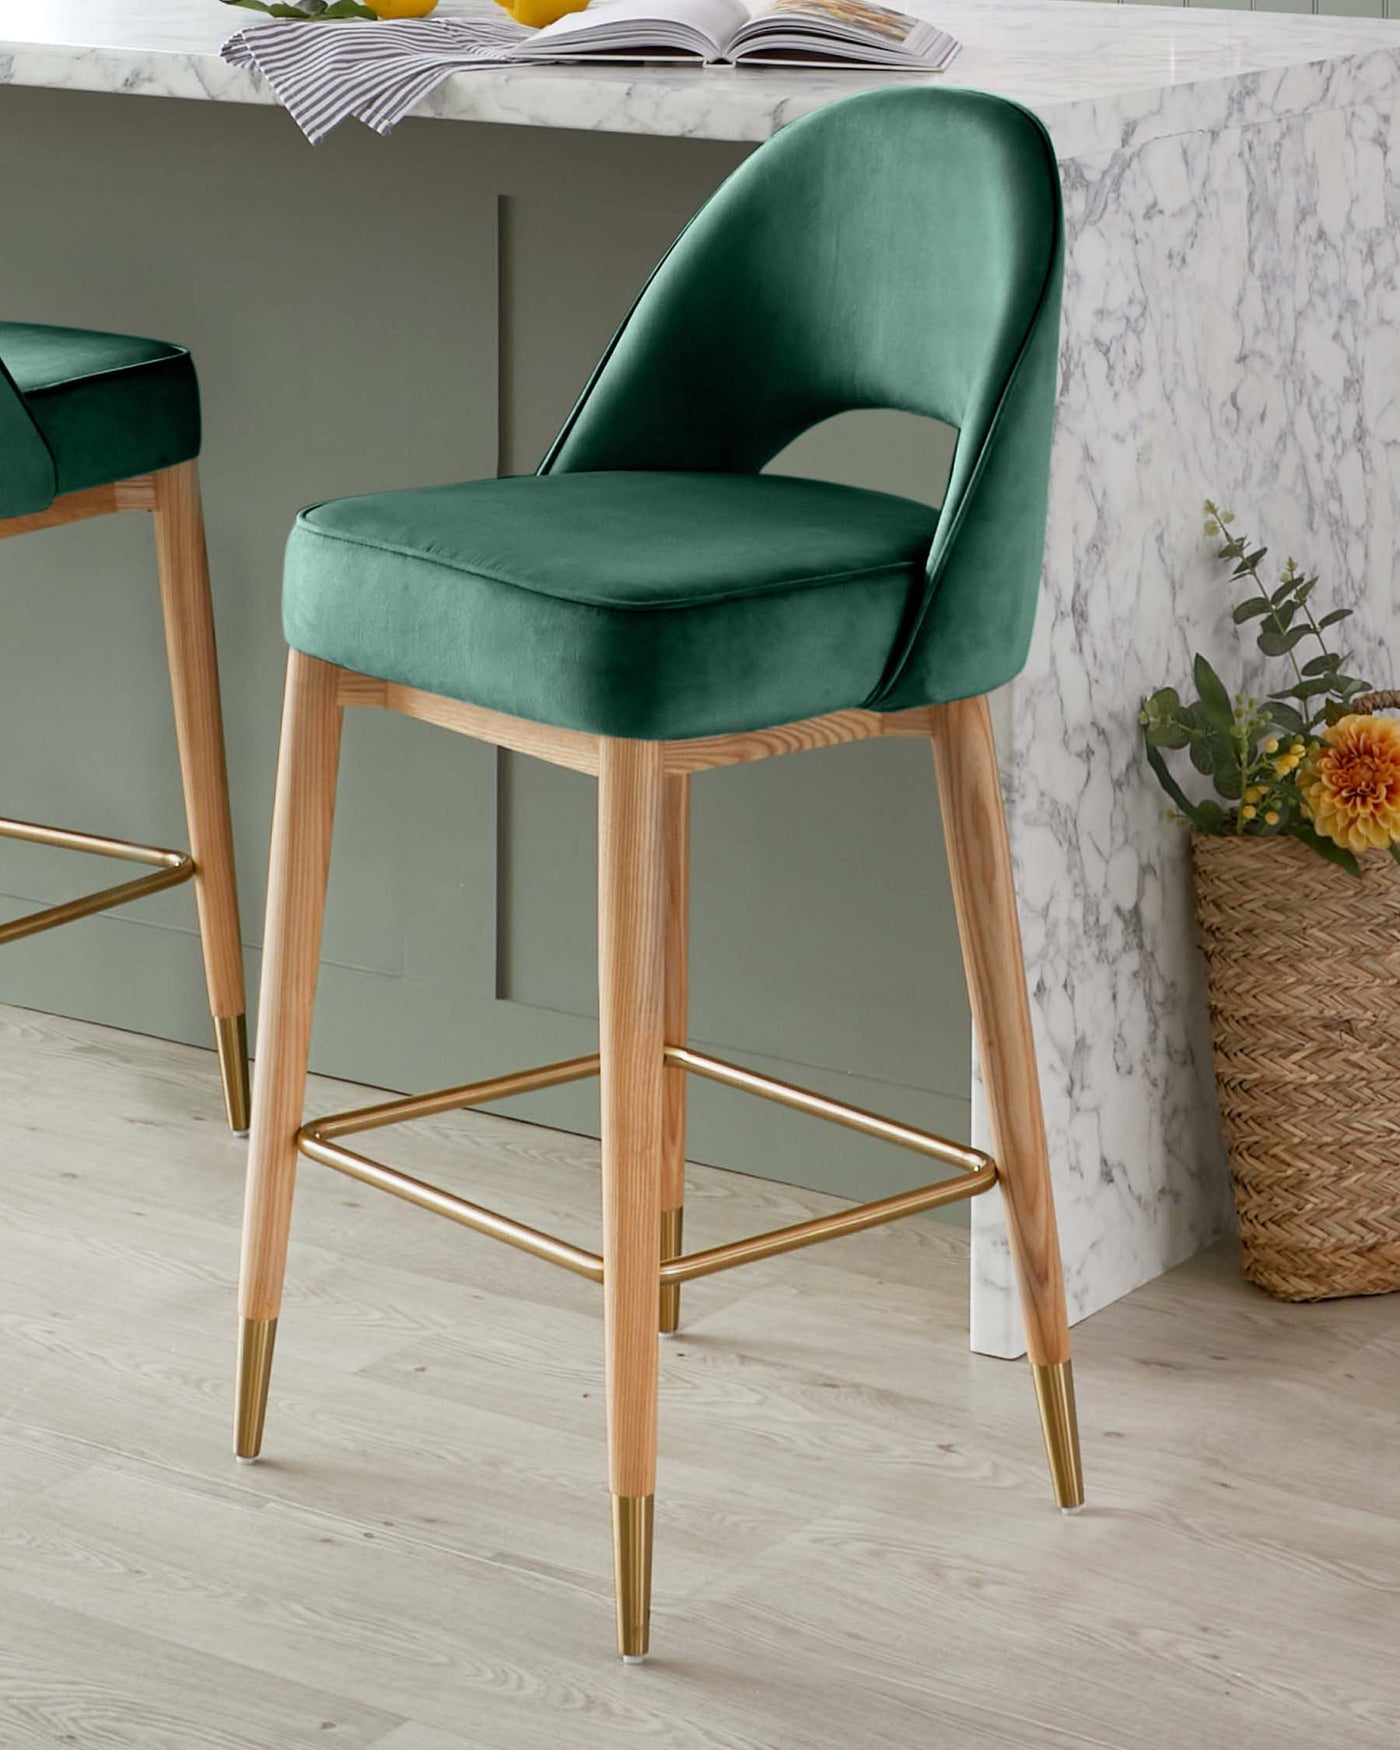 Elegant modern bar stool with a plush, emerald green velvet seat and backrest, set atop a sleek wooden frame with light wood finish and accented with gold-tone footrests and leg caps.